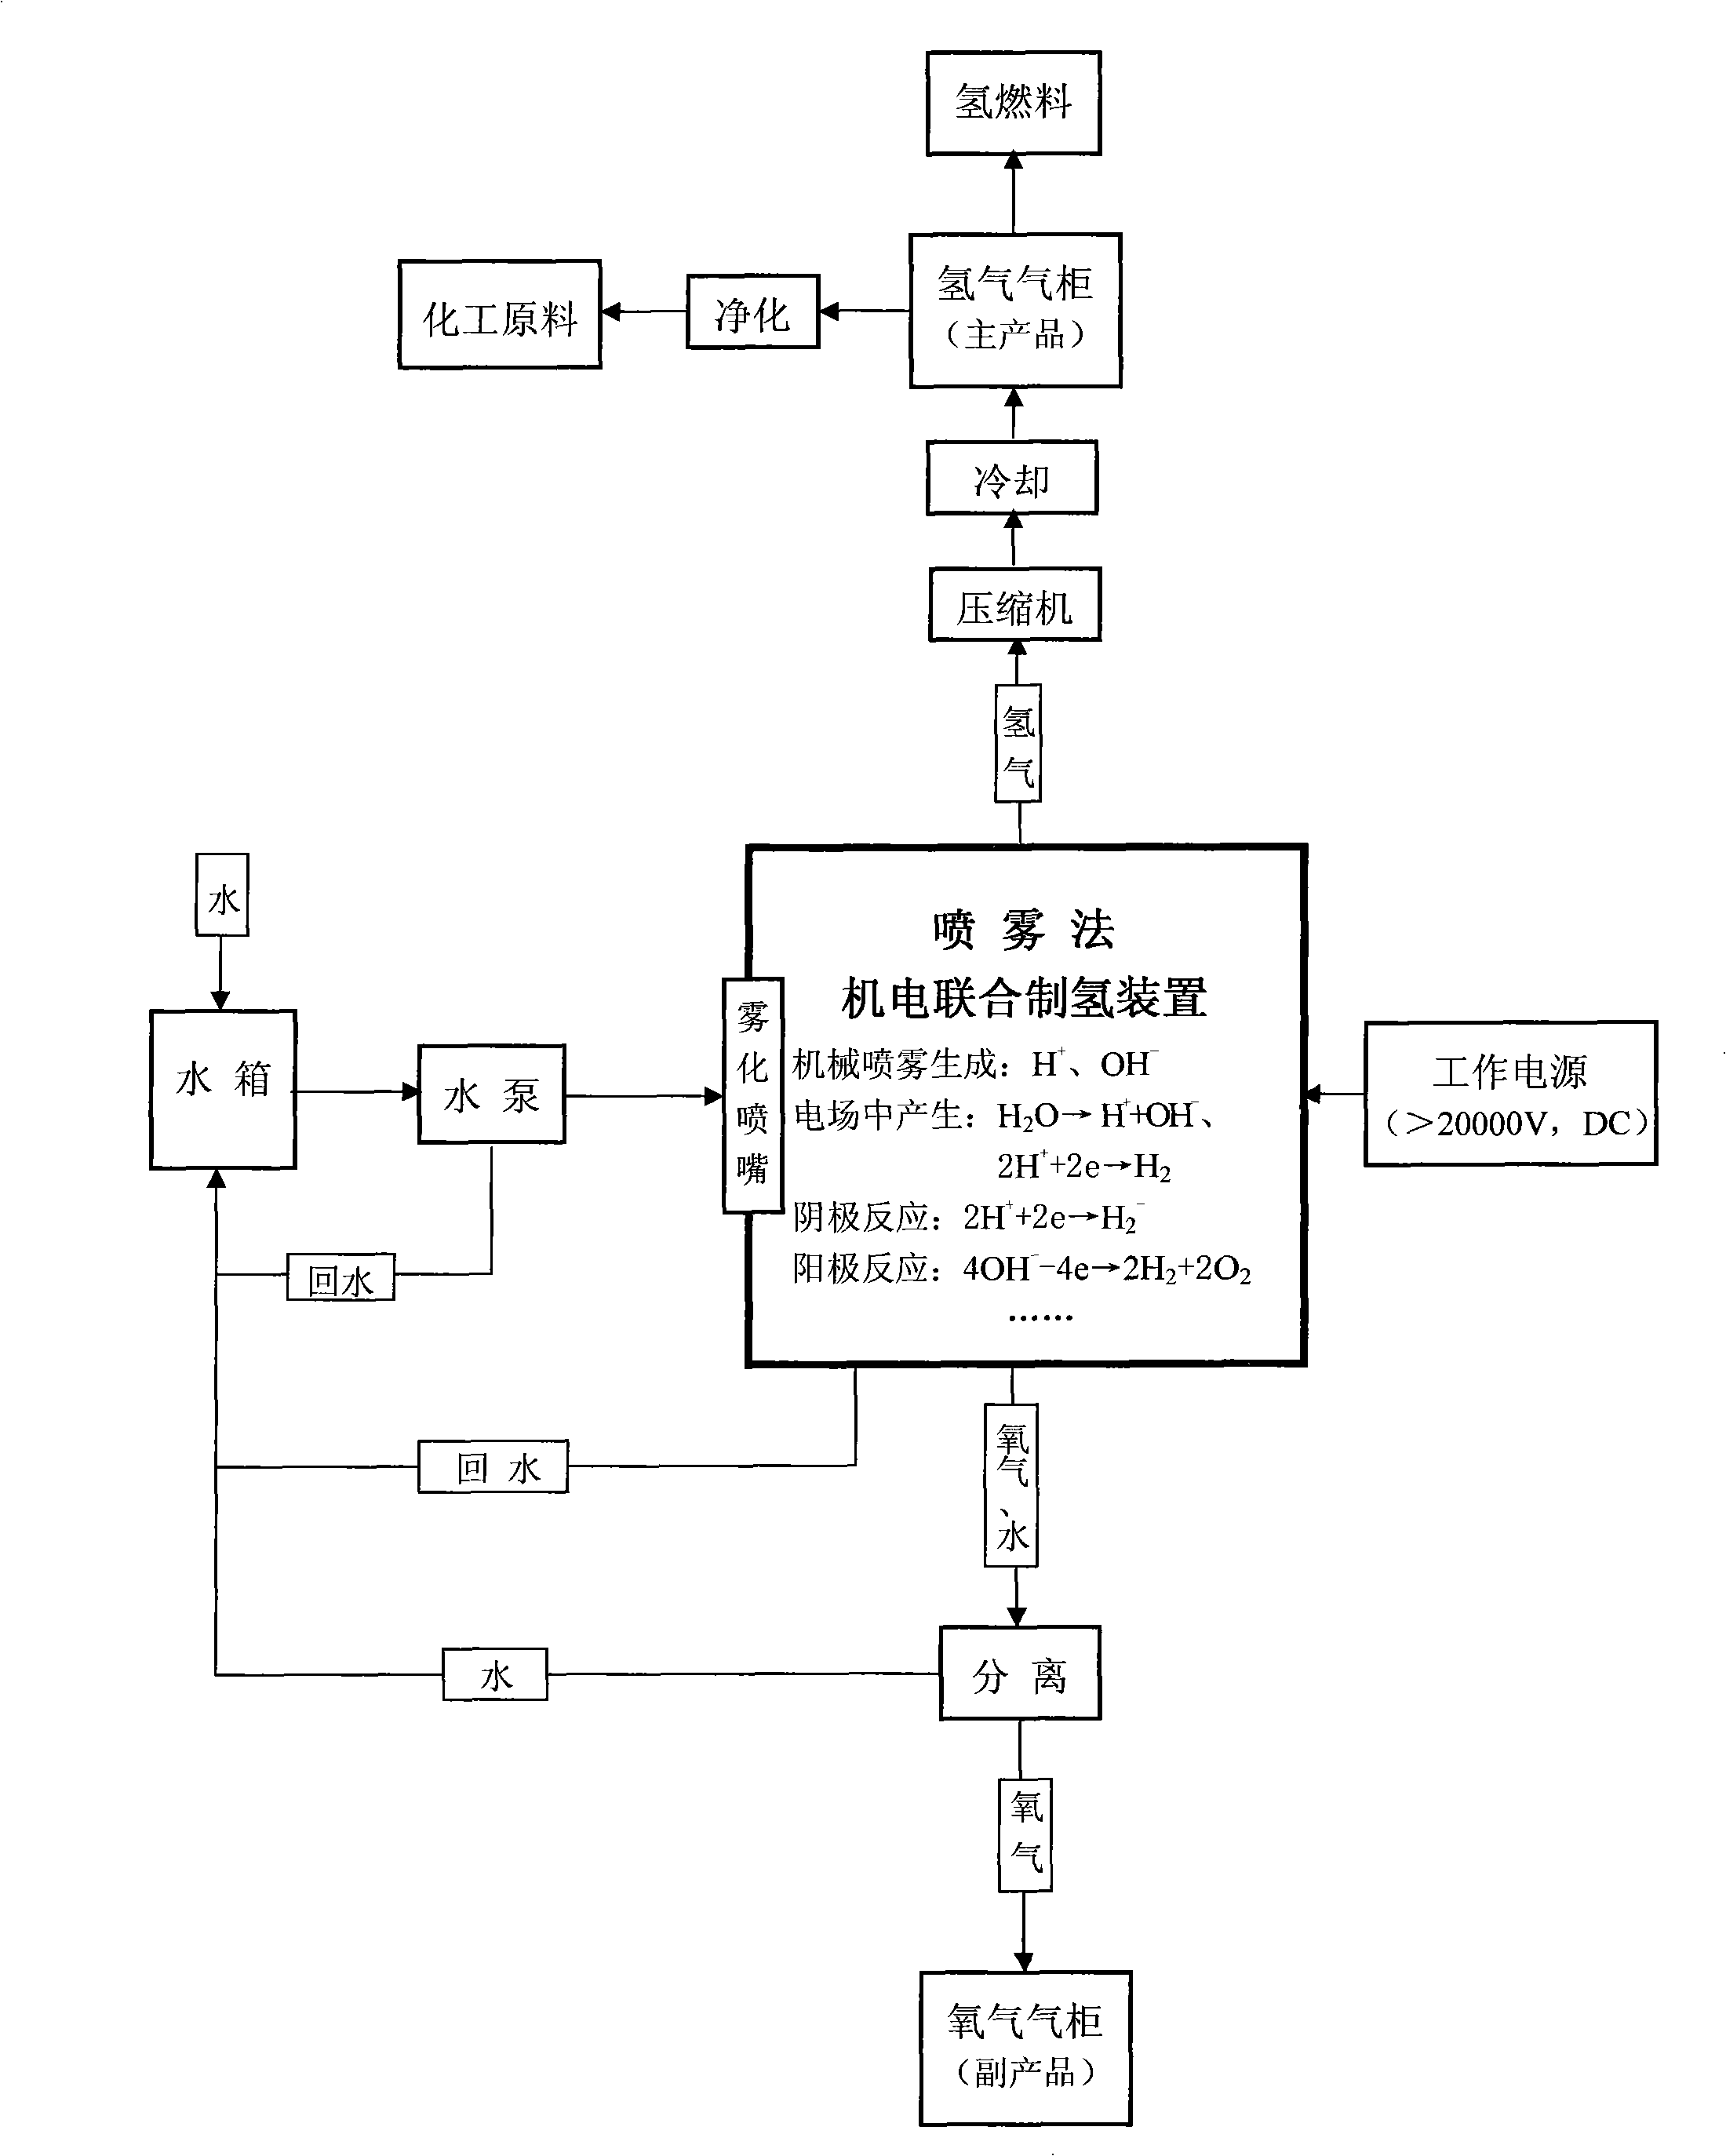 Electromechanical combination preparation process and apparatus for hydrogen by spray method